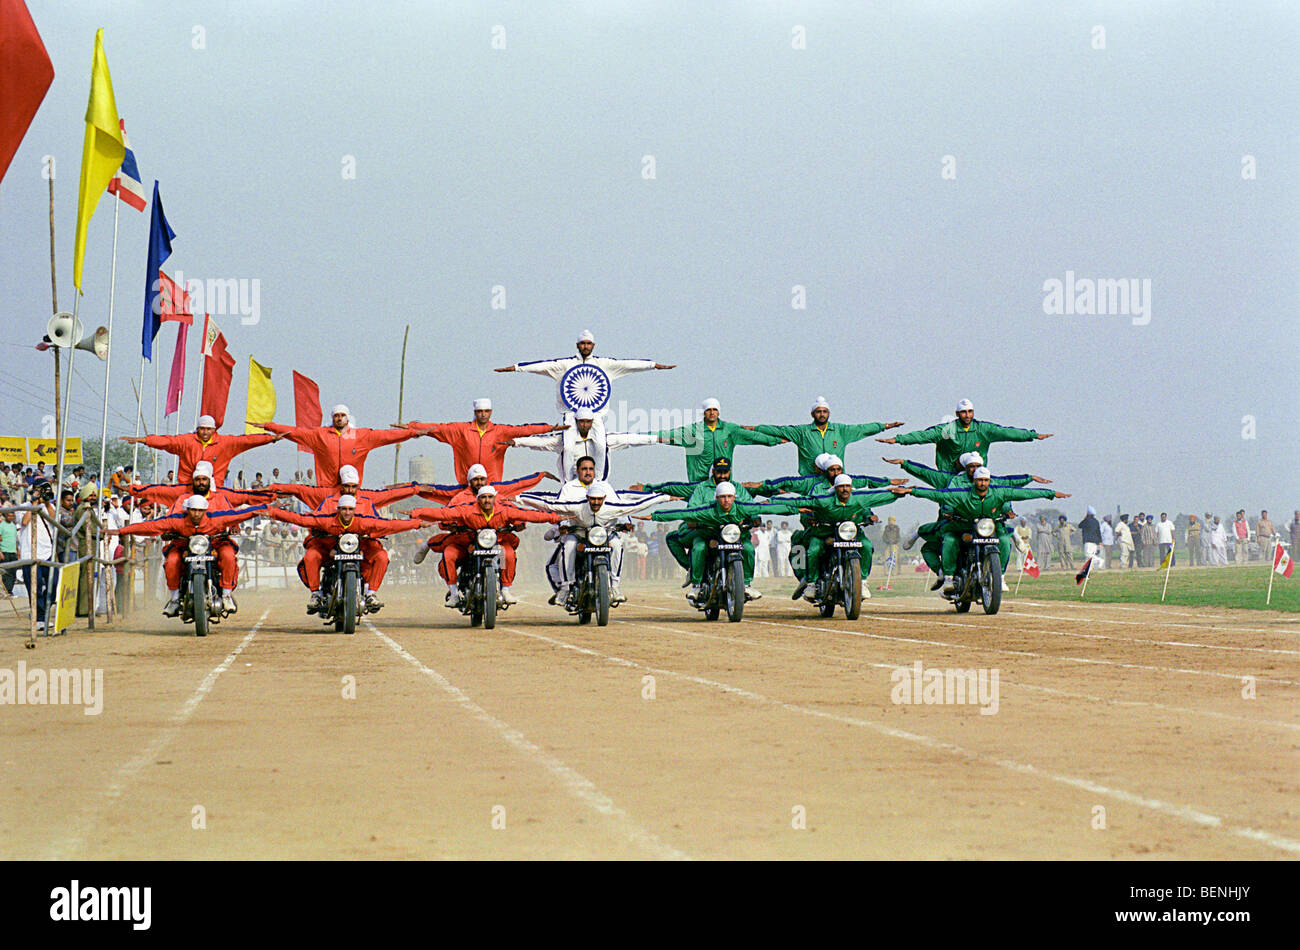 Stuntmen making the colours of the Indian Flag on motorcycles at rural Olympic games in Kila Raipur Punjab India Stock Photo